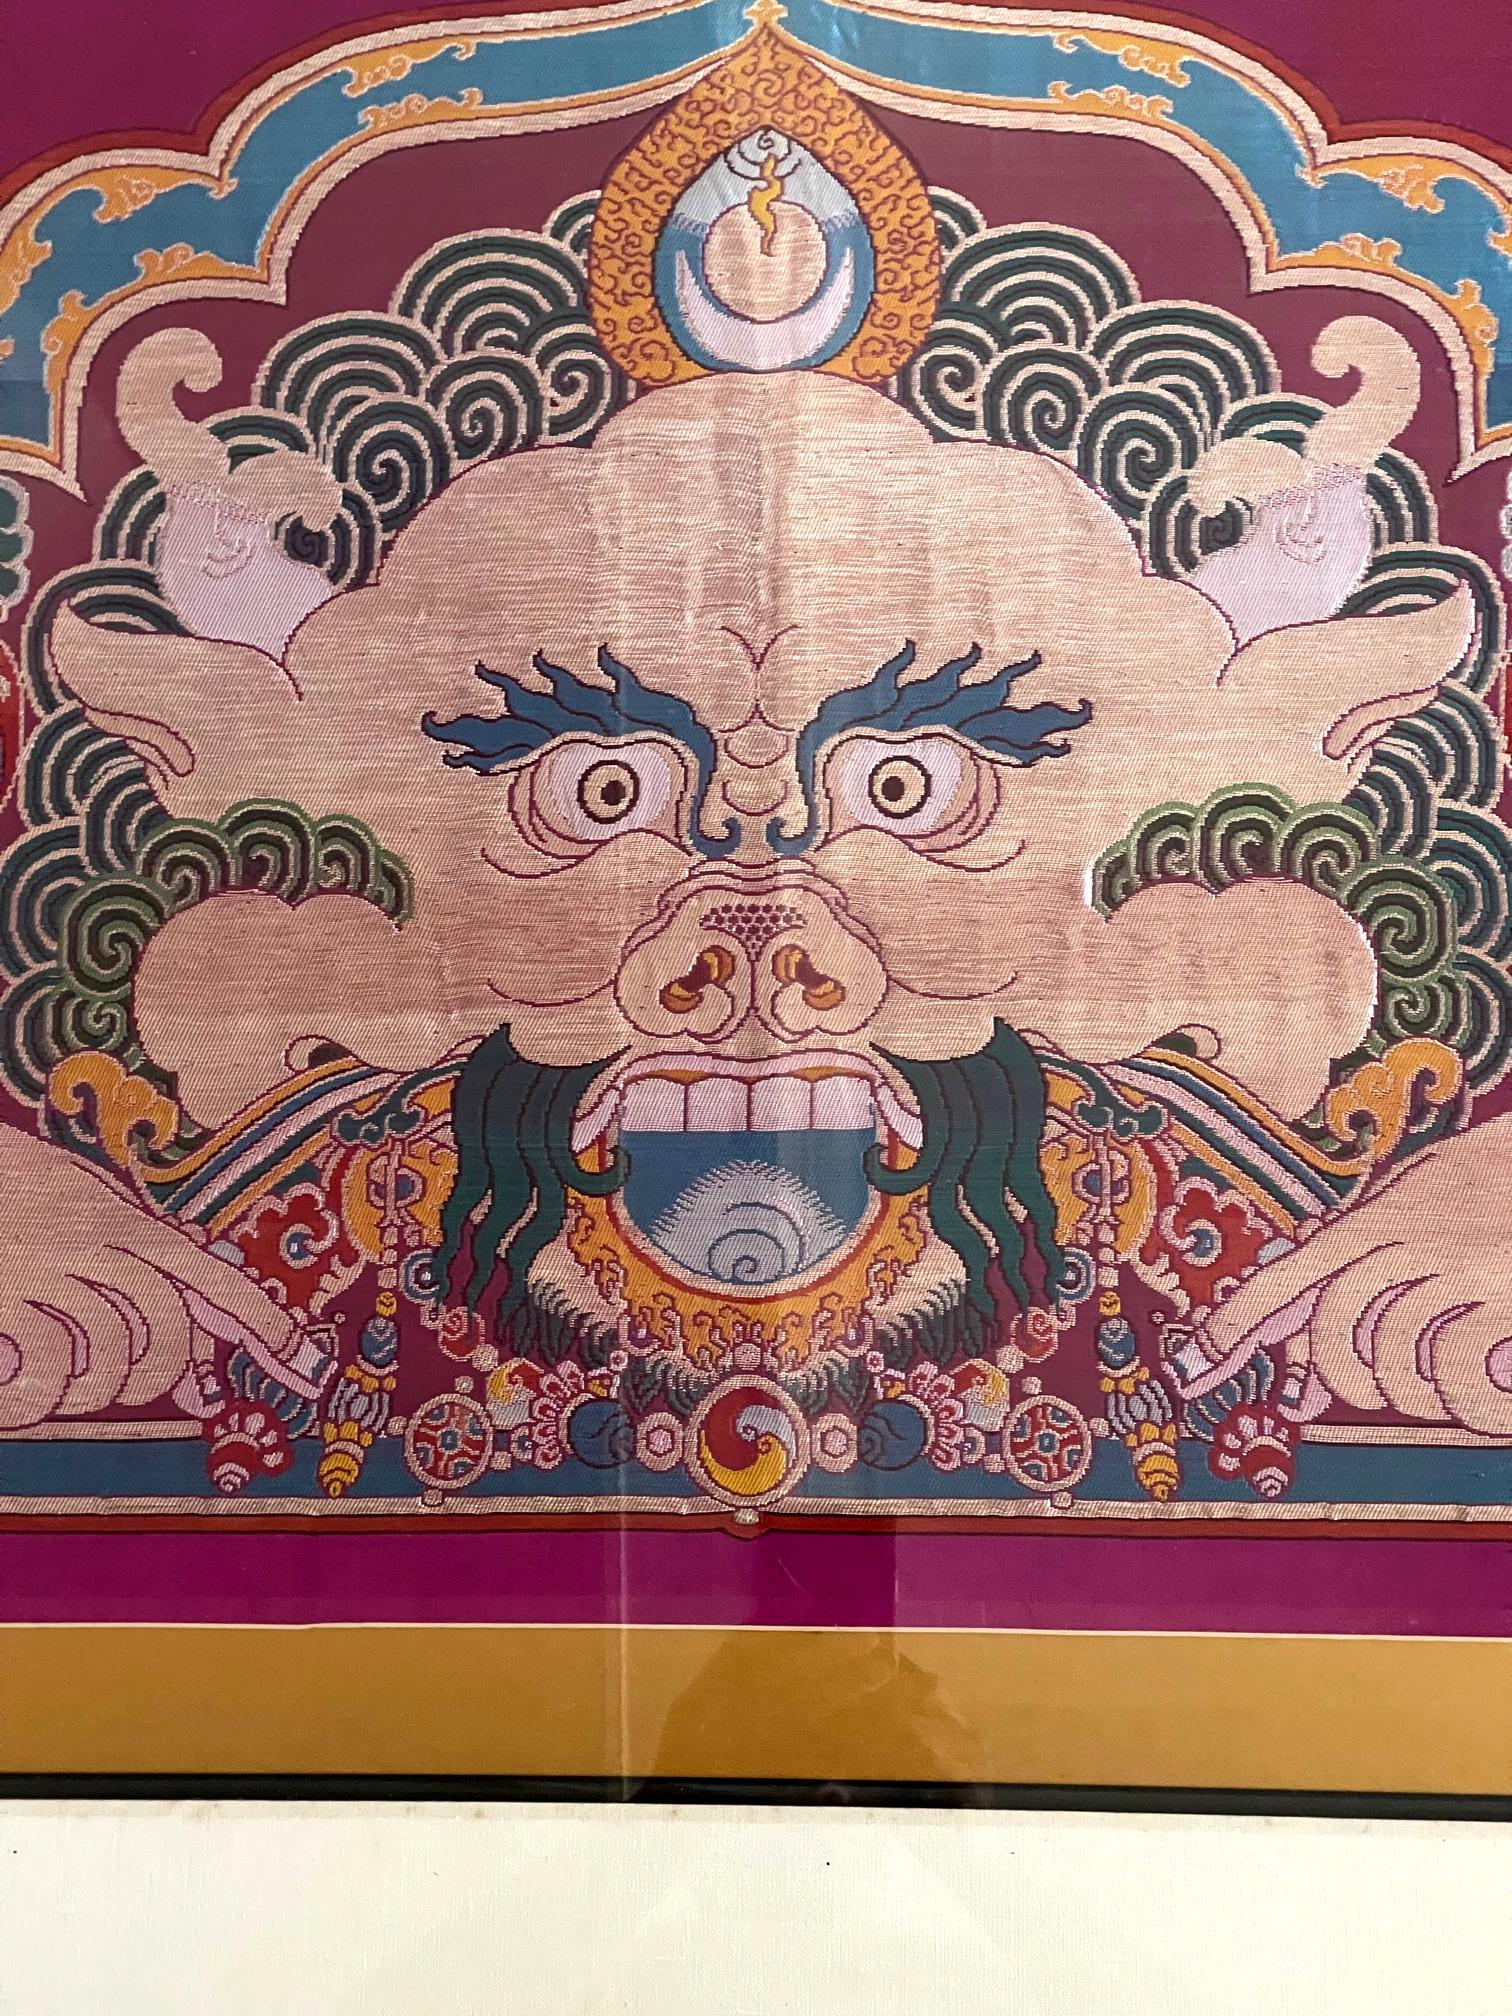 A woven silk Kesi panel depicts Kirtimukha from Tibet circa the second half of 20th century. Beautifully woven from short weft silk with superb coloring and delineation details, the bright colored panel was likely used as a curtain or banner for a